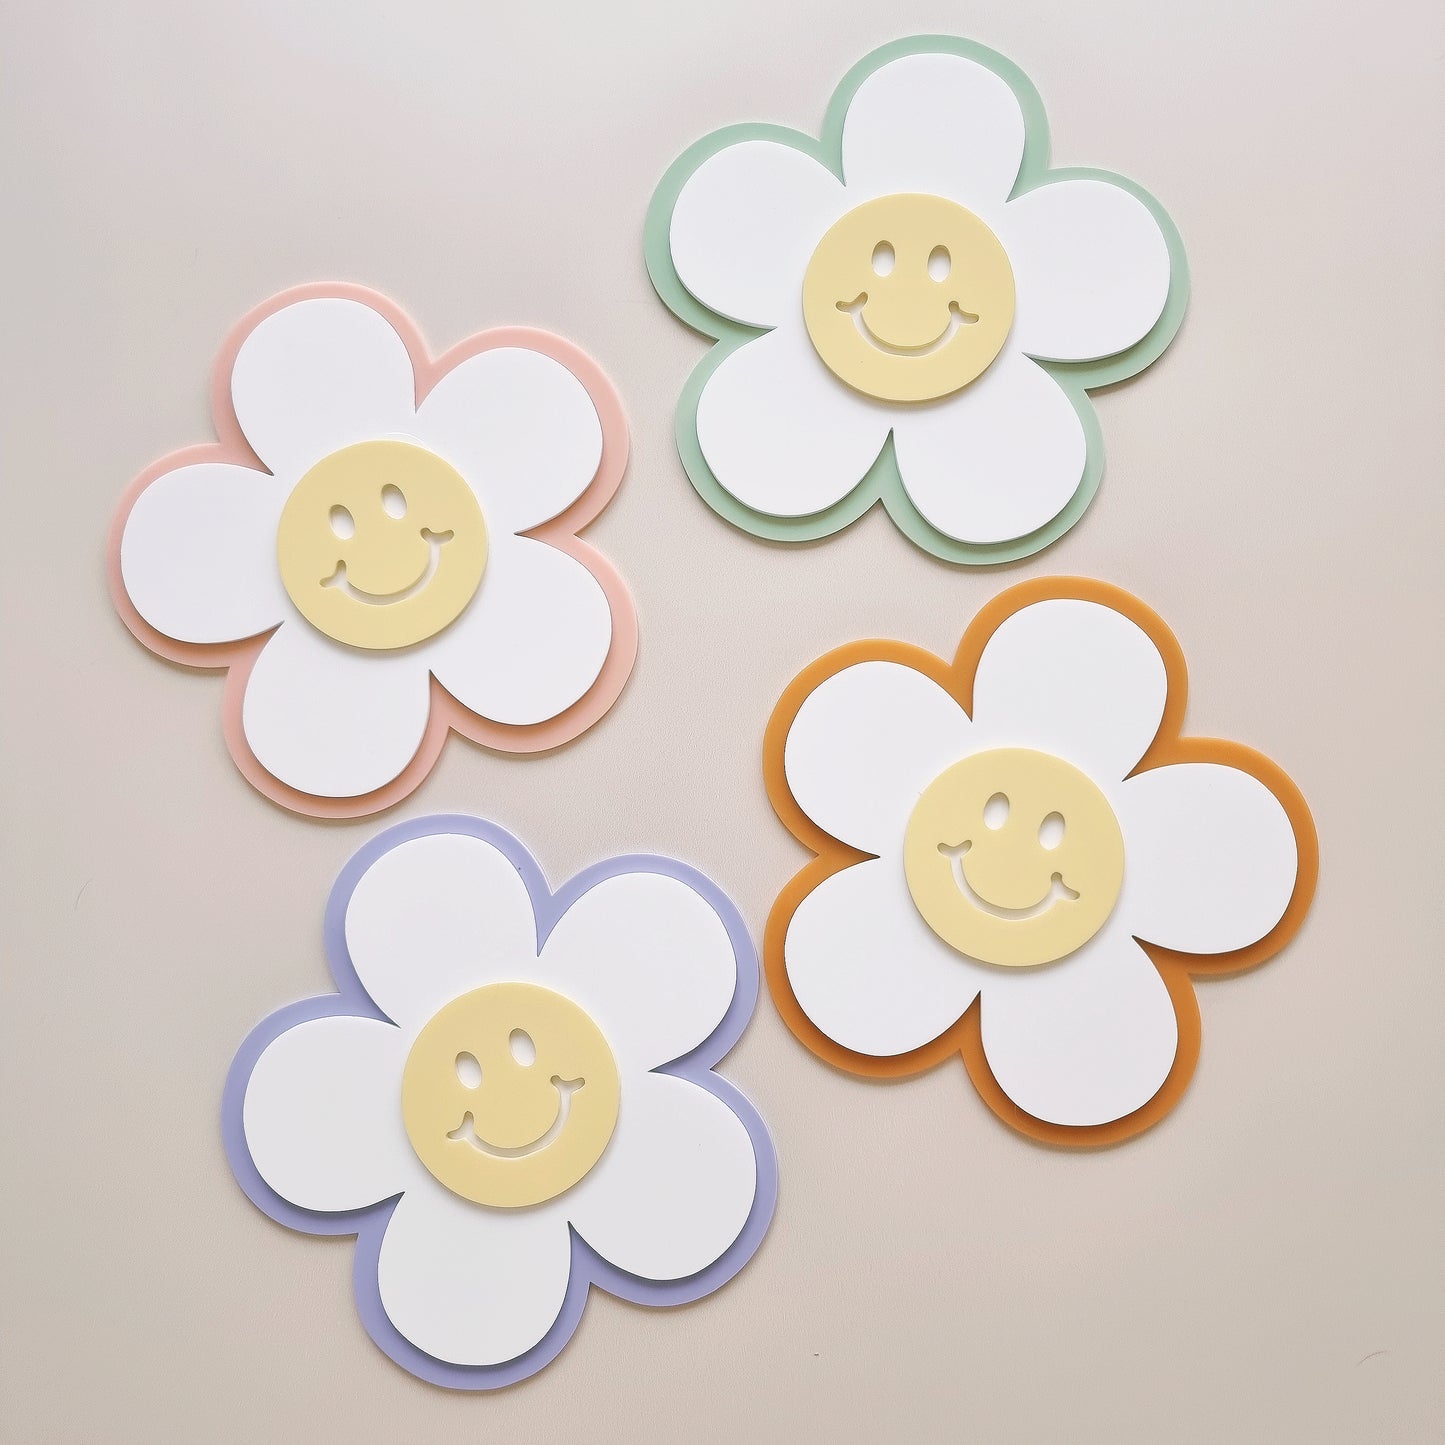 3d 'Have a Nice Daisy' Wall Daisies-Ready to Ship